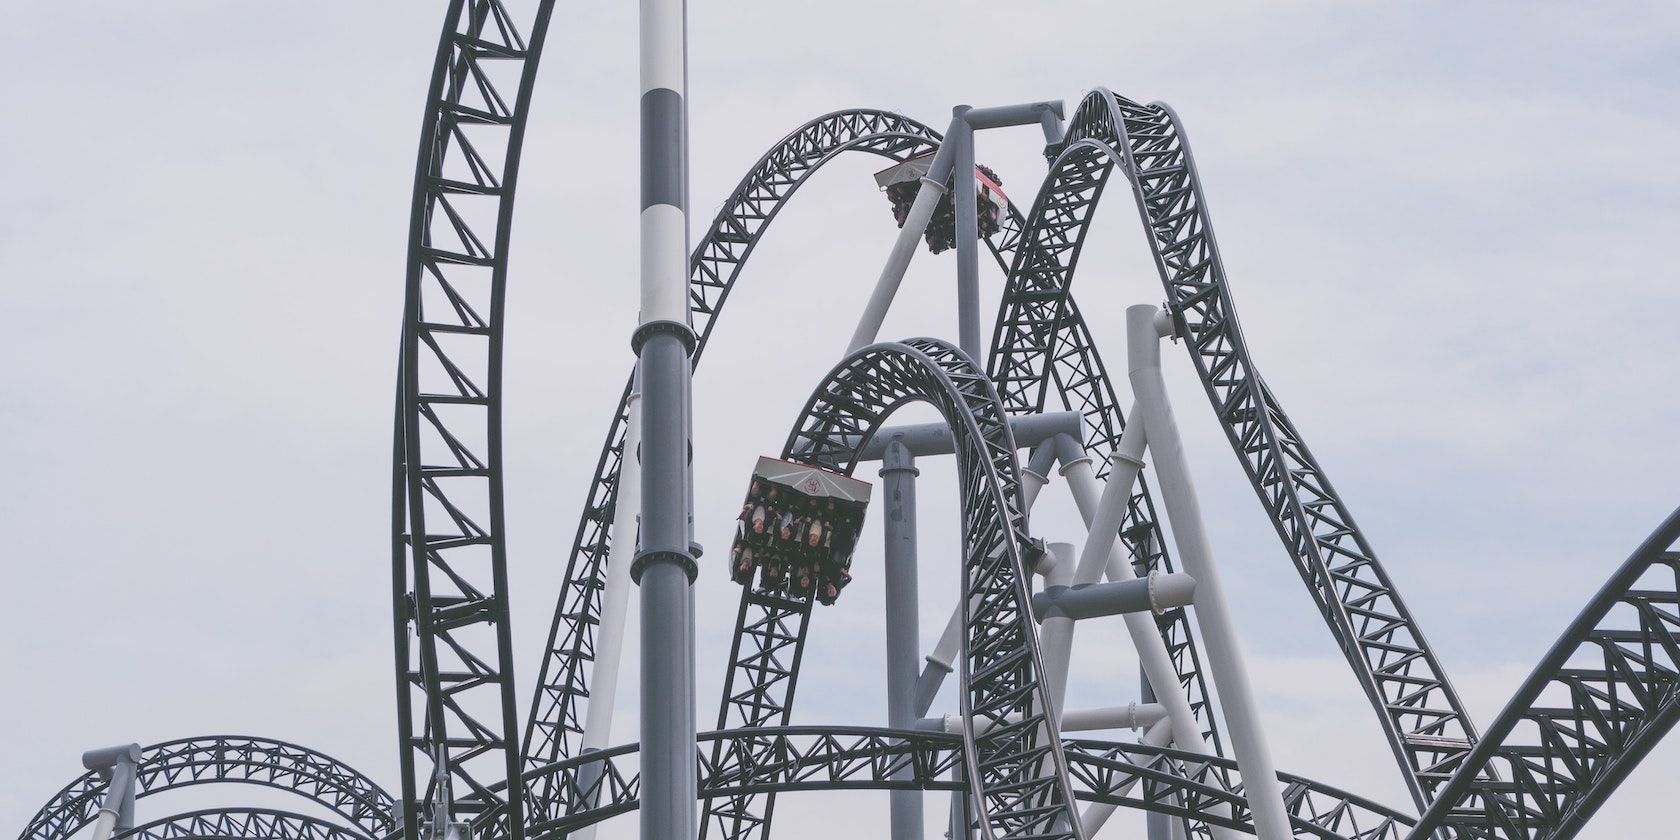 A photo of a roller coaster ride with looping tracks